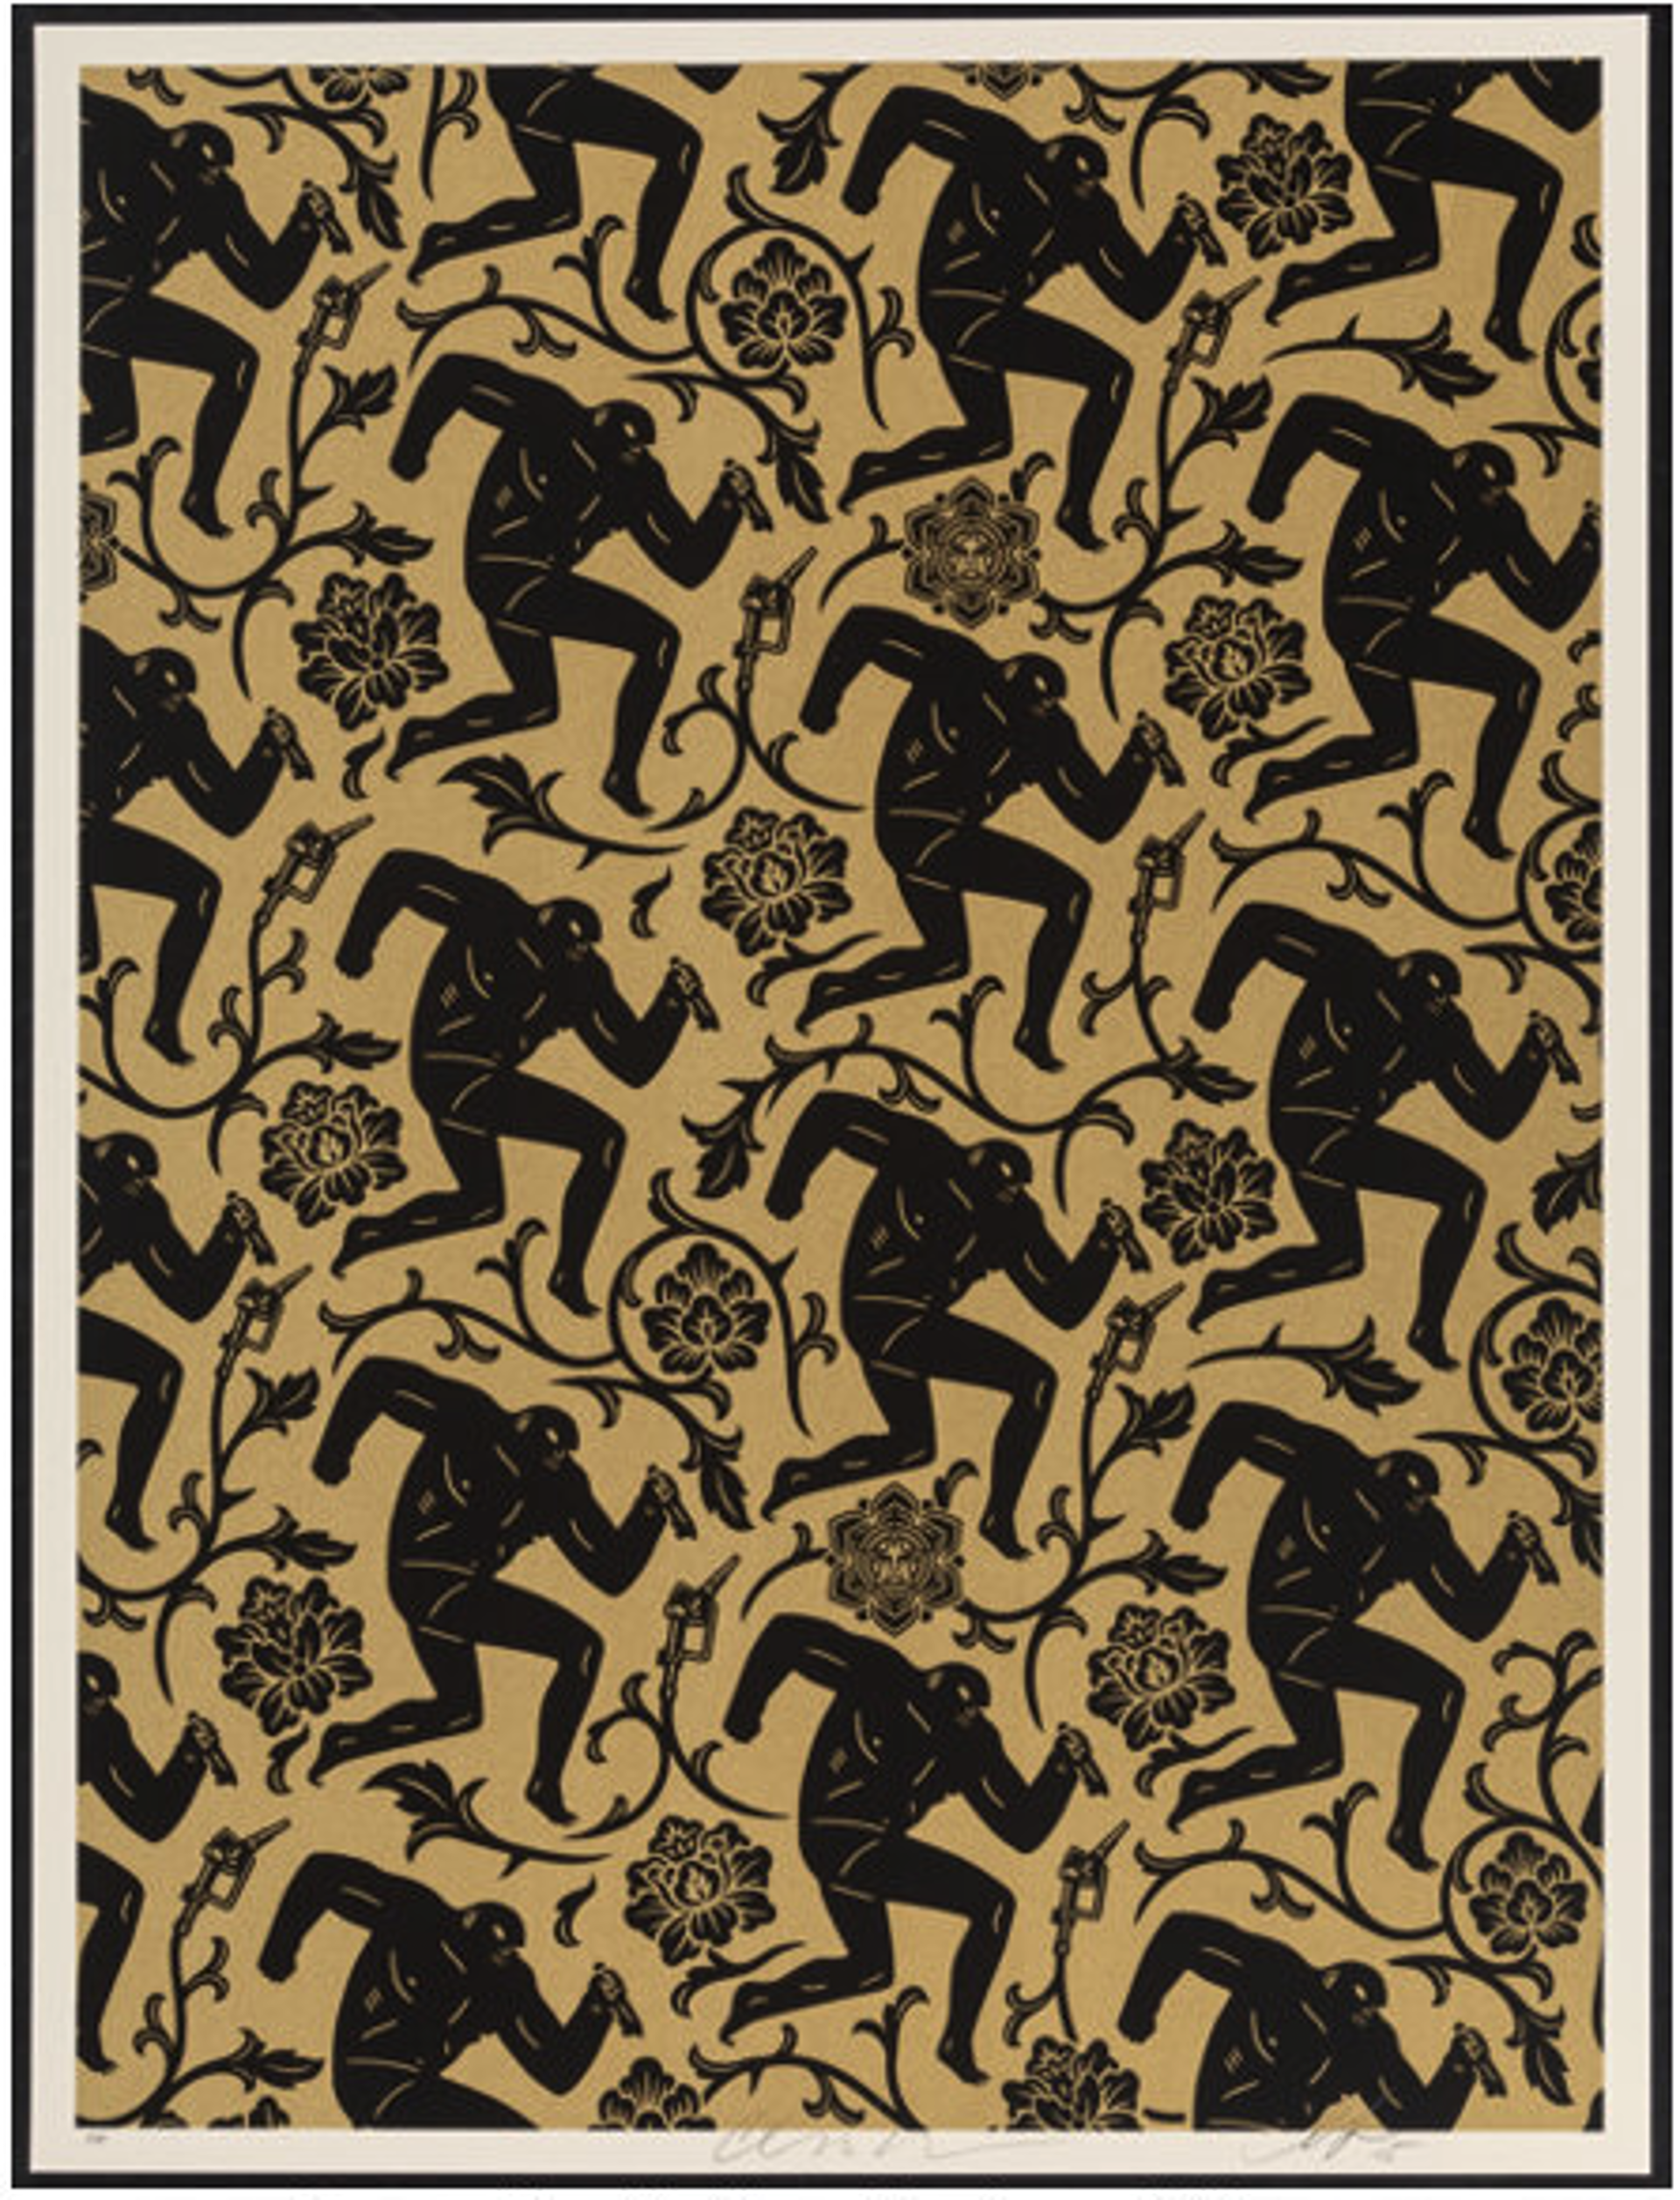 Pattern of Corruption (Gold) (AP/150) by Cleon Peterson